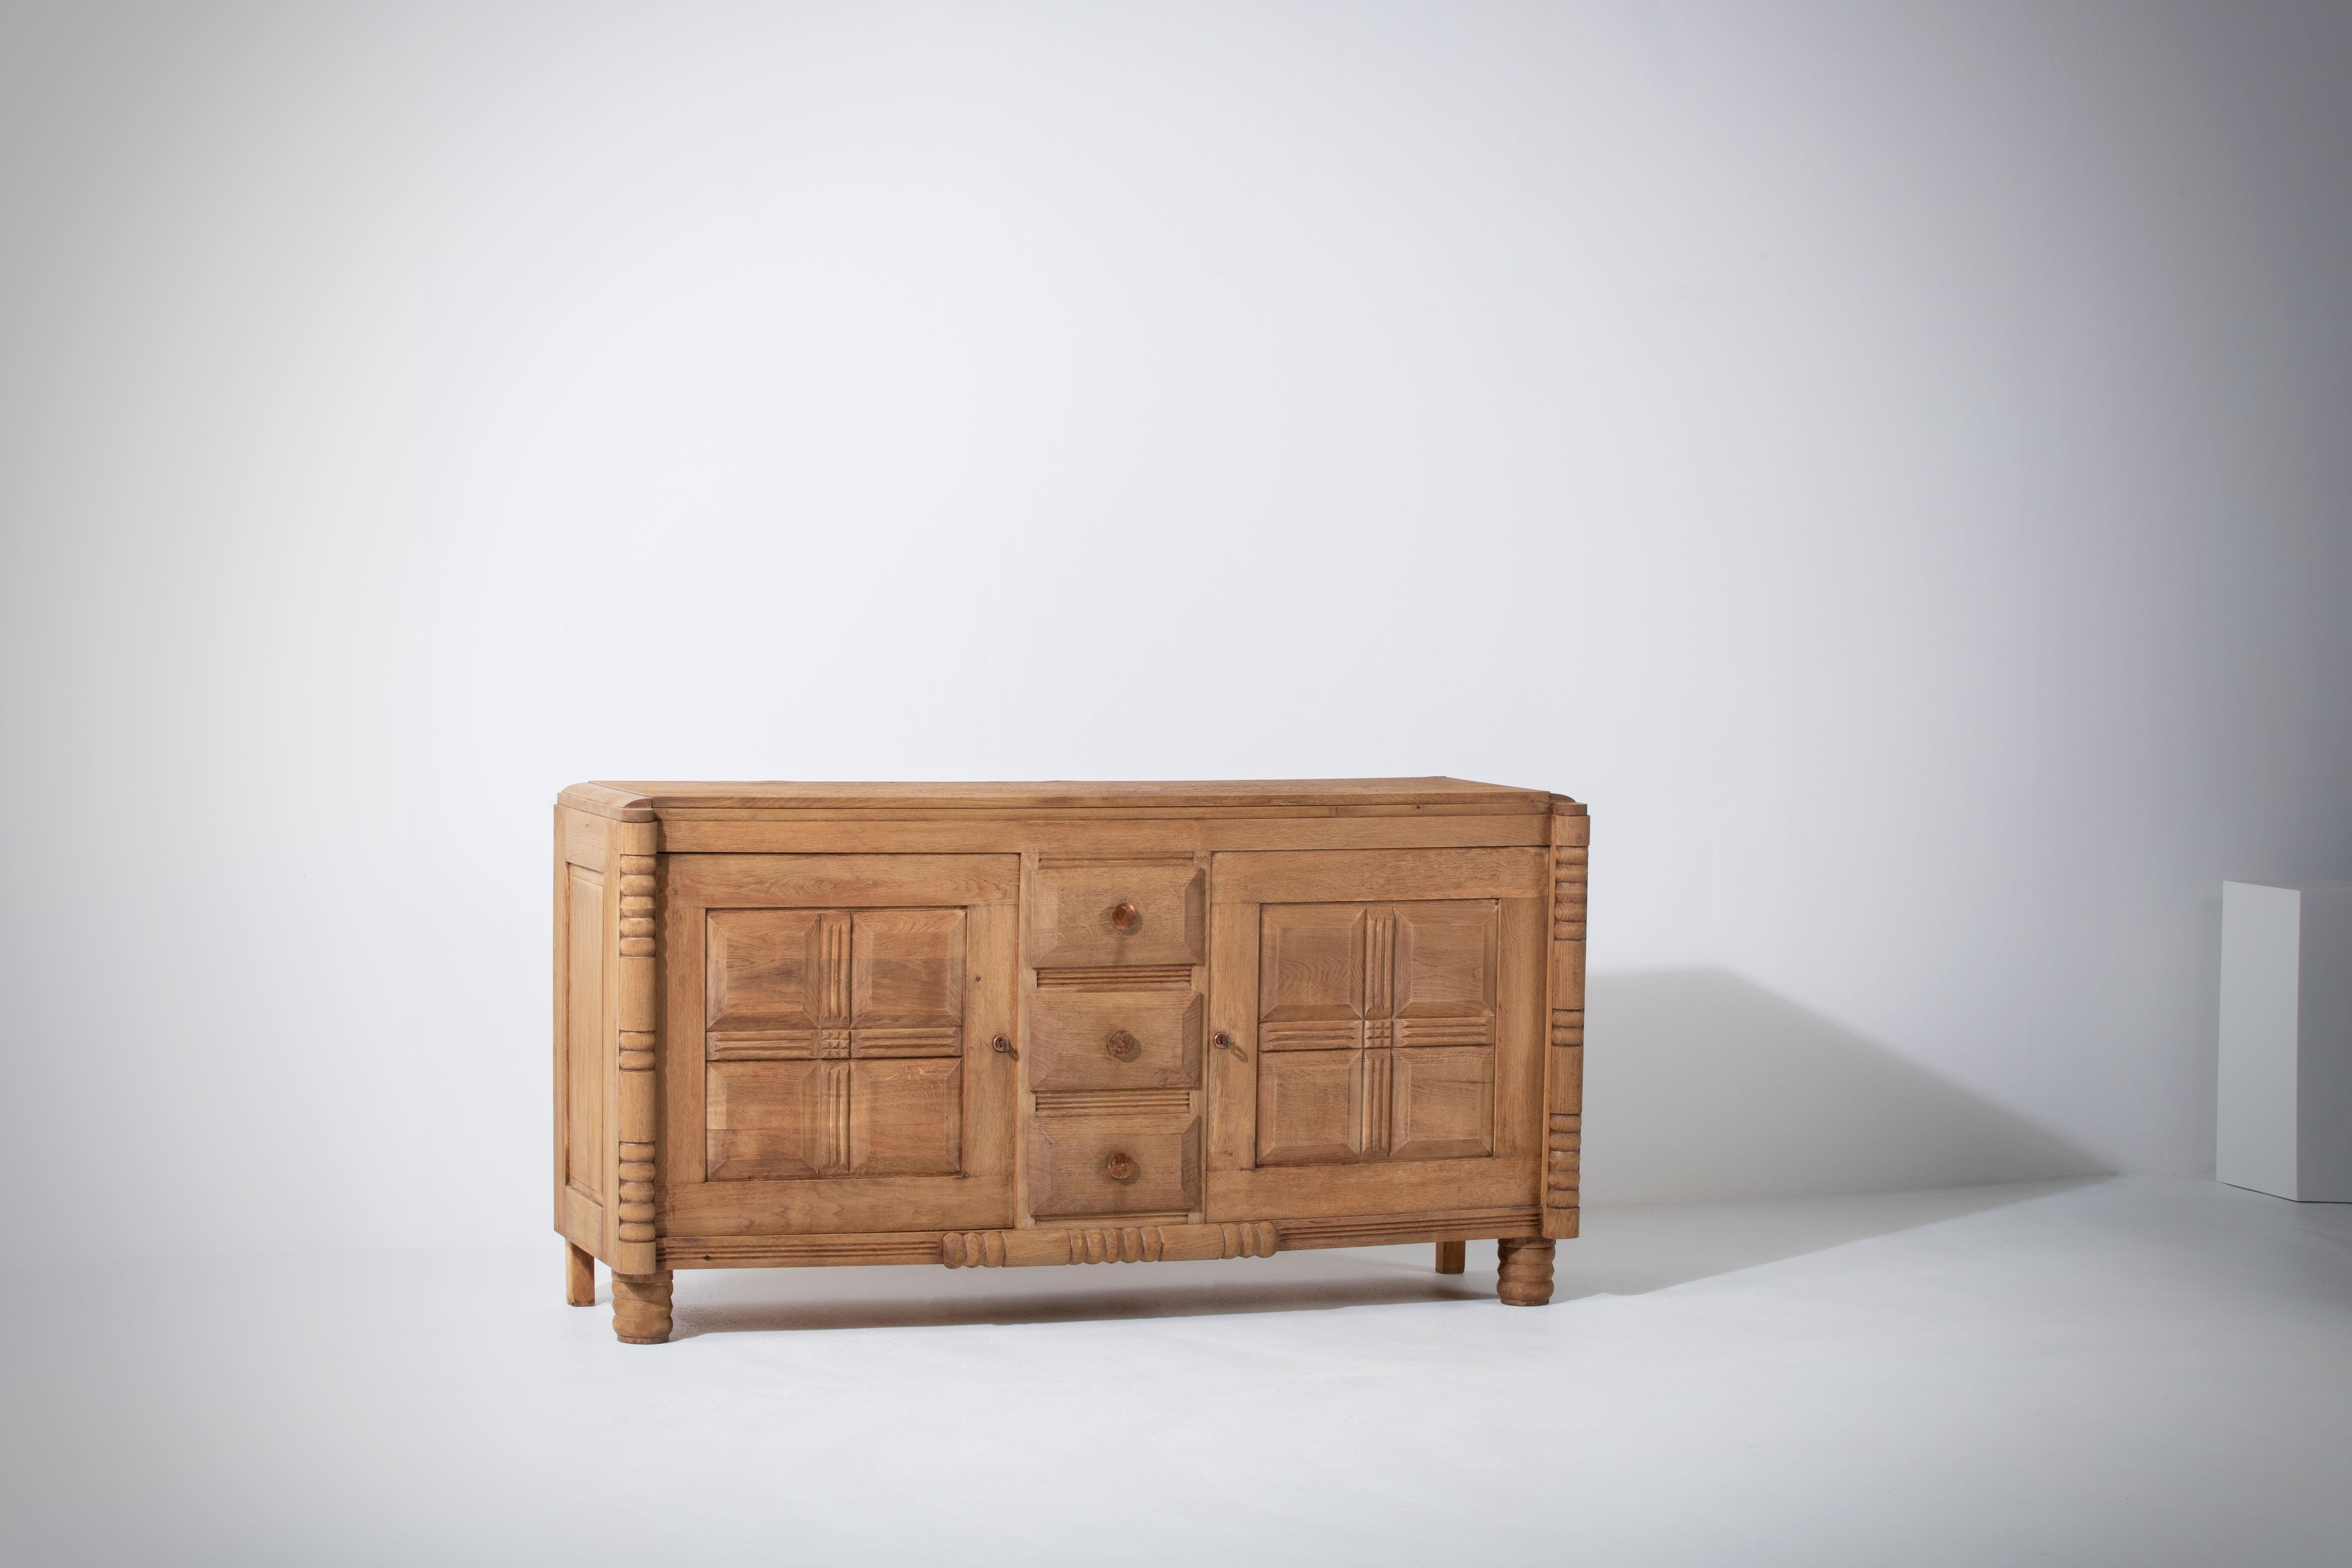 Matching sideboard available.
Very elegant Credenza in solid oak, France, 1940s.
Art Deco Brutalist sideboard. 
The credenza consists of Two storage facilities covered with graphic designed doors and a column of drawers.
The refined wooden